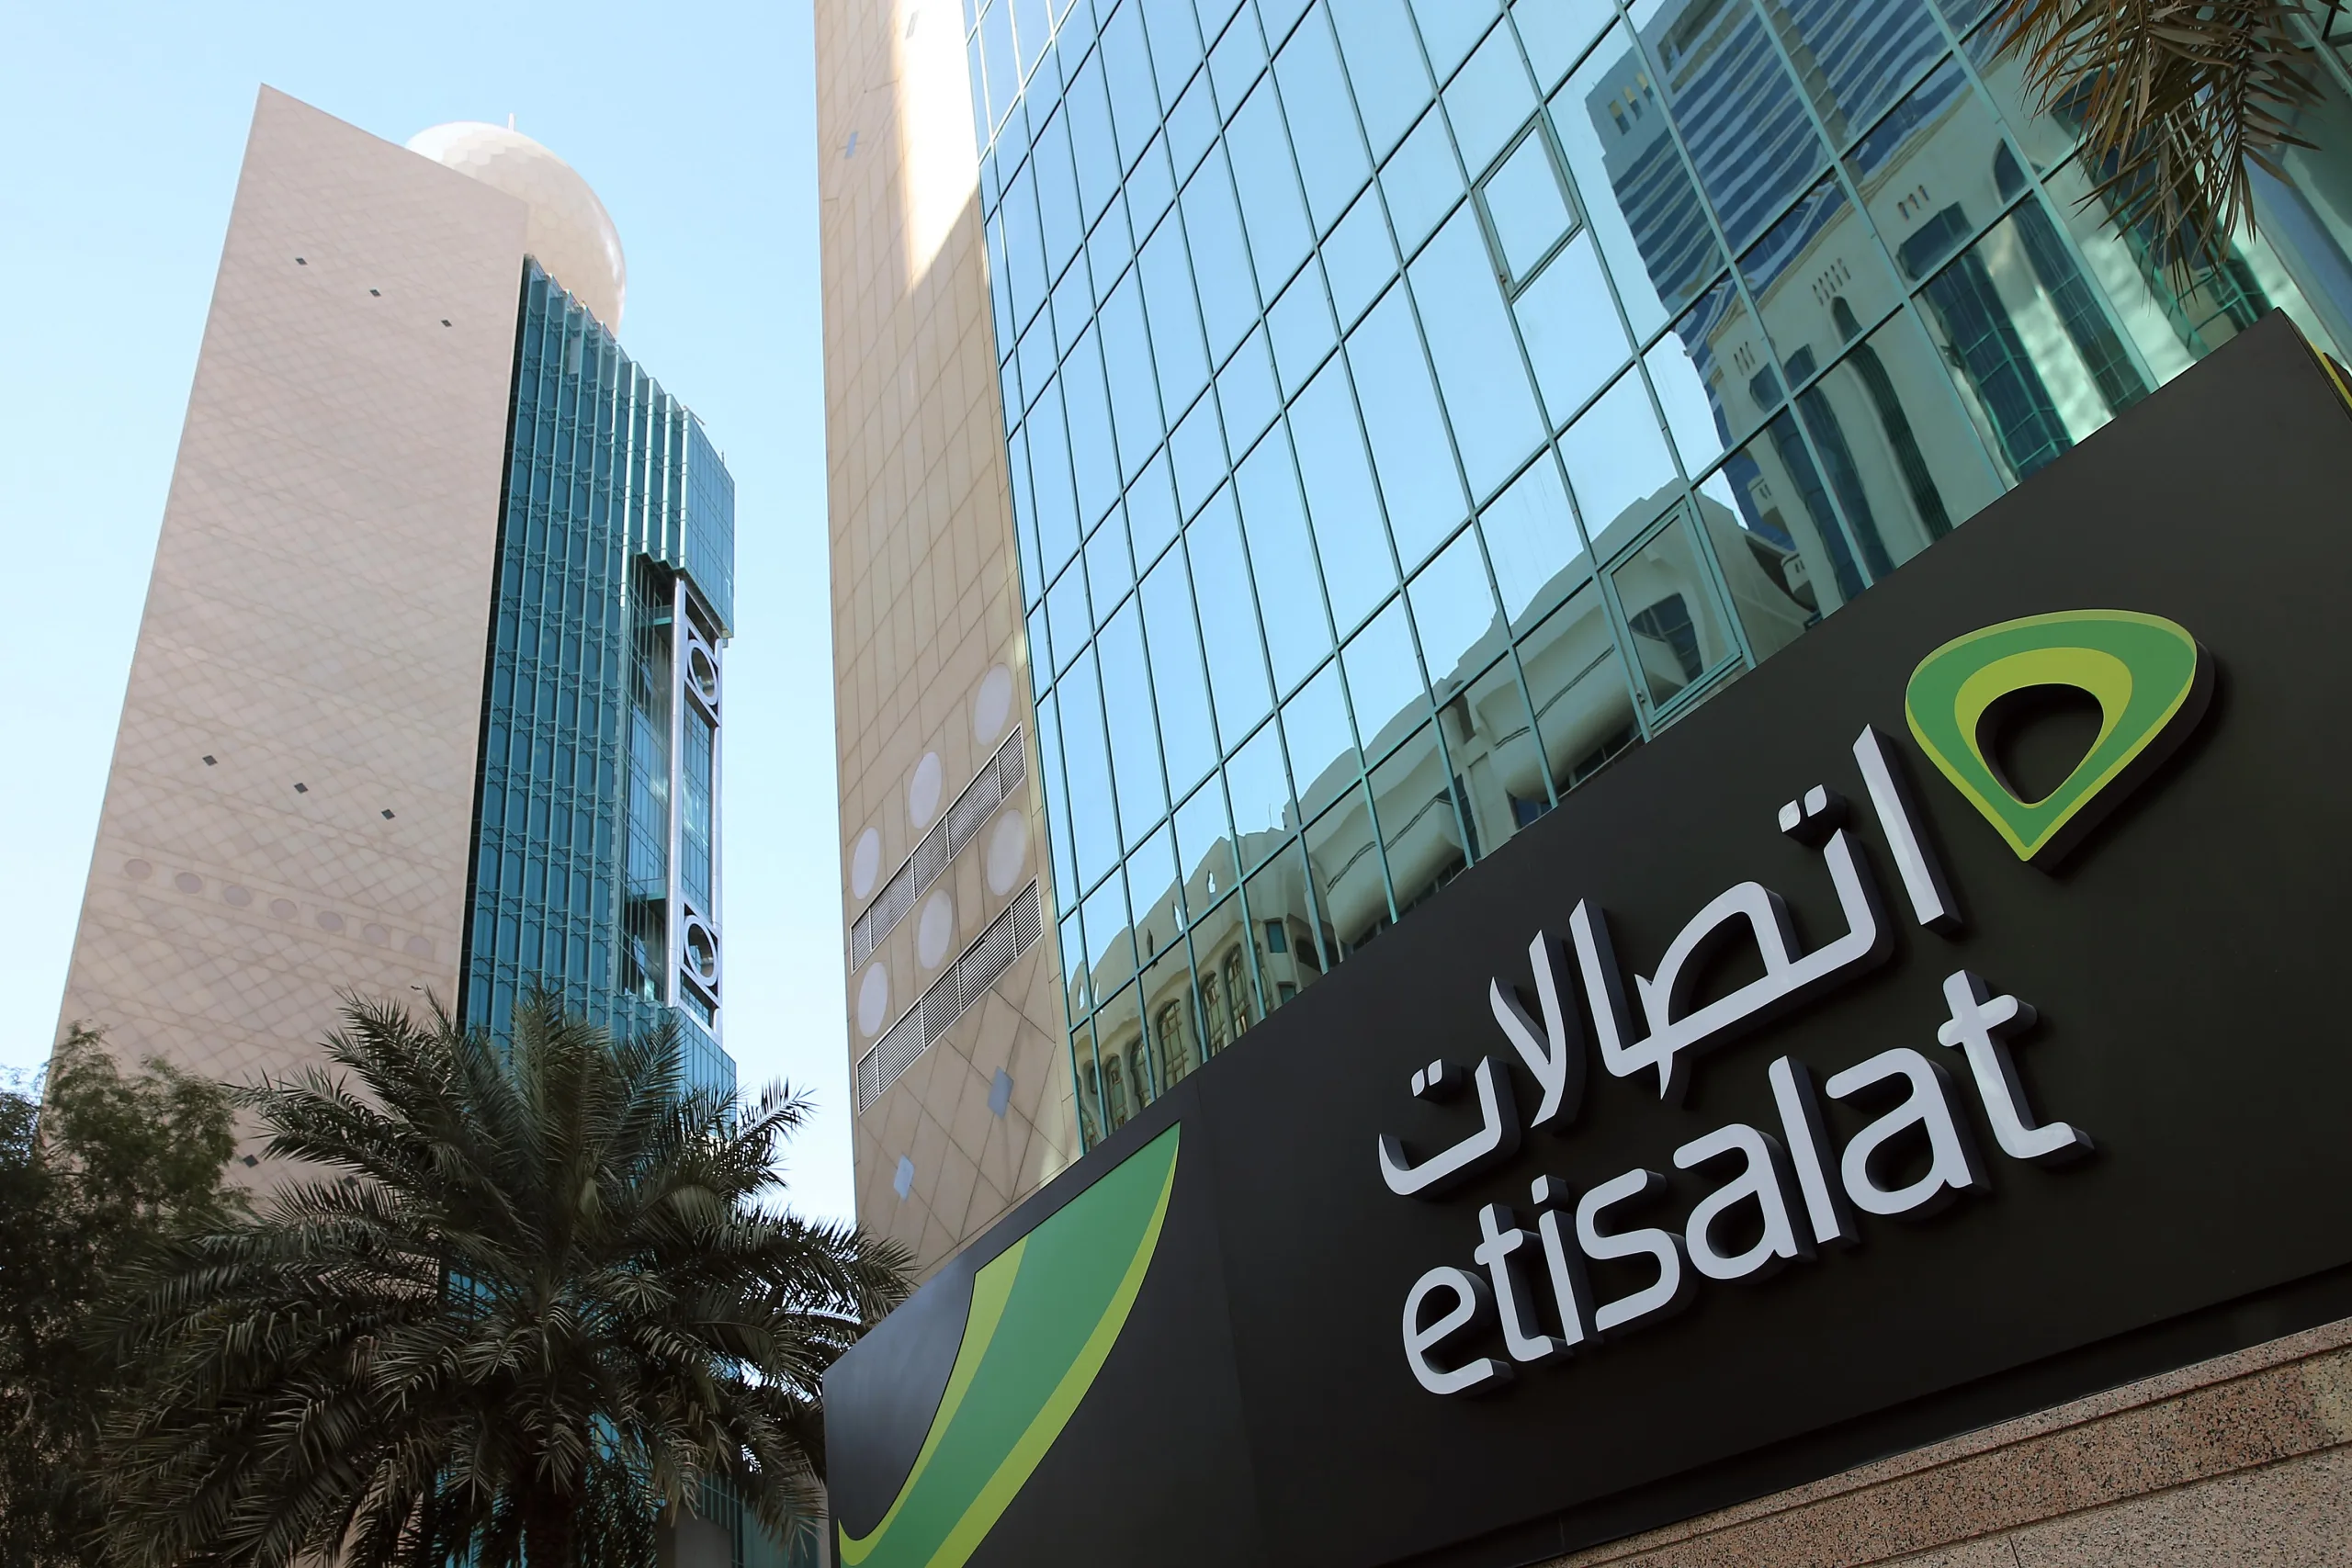 How to Unsubscribe Etisalat Daily Data Plan in UAE?